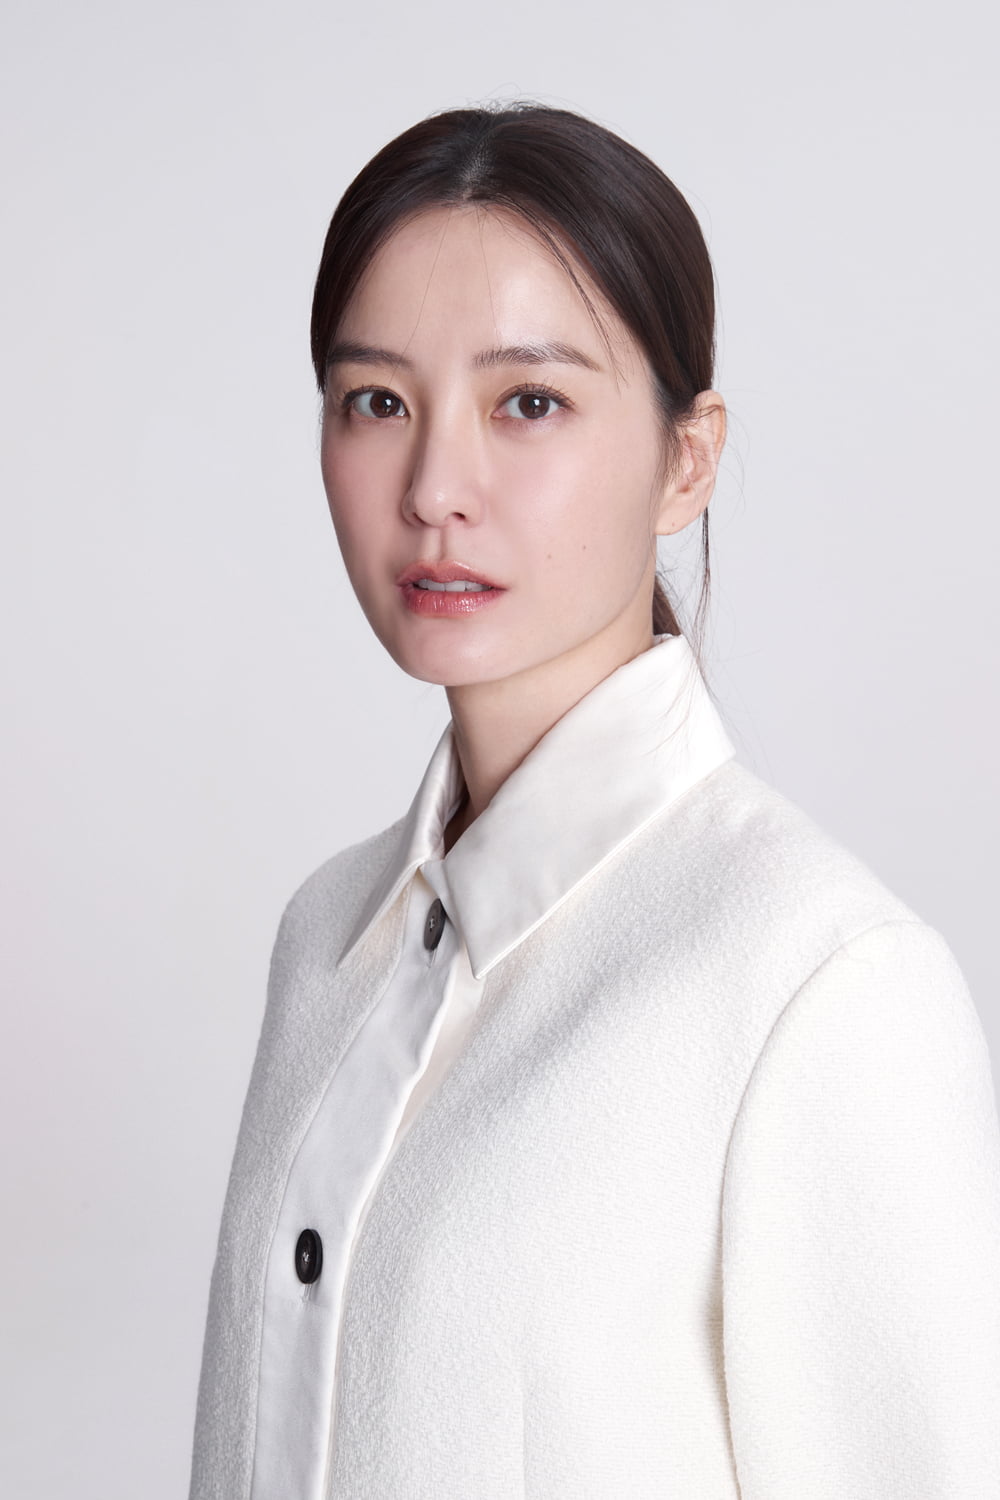 Jung Yu-mi "After 6 years of performing arts with Lee Seo-jin and Park Seo-joon, there is nothing to be afraid of"